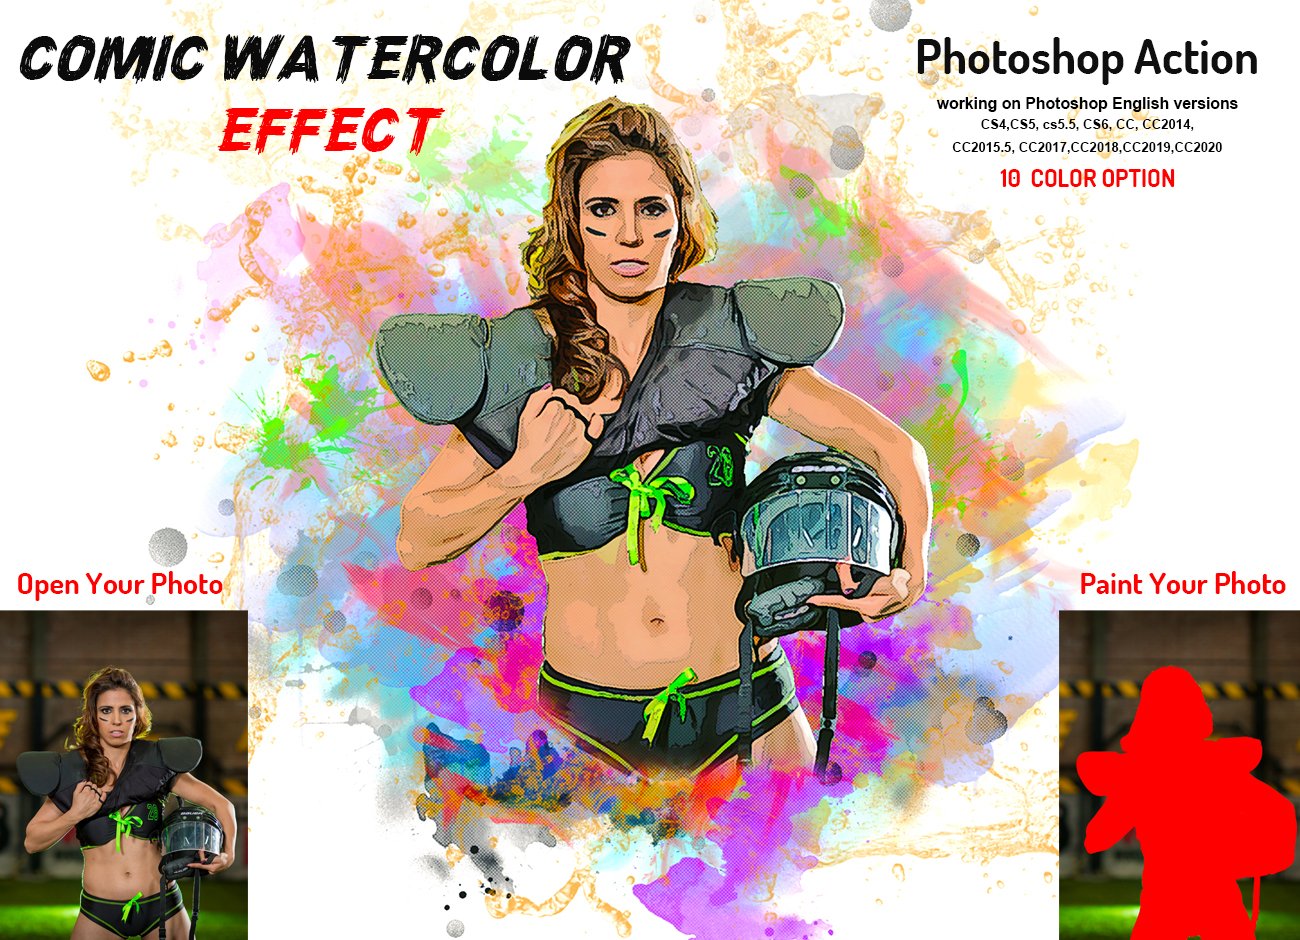 Comic Watercolor Effect PS Actioncover image.